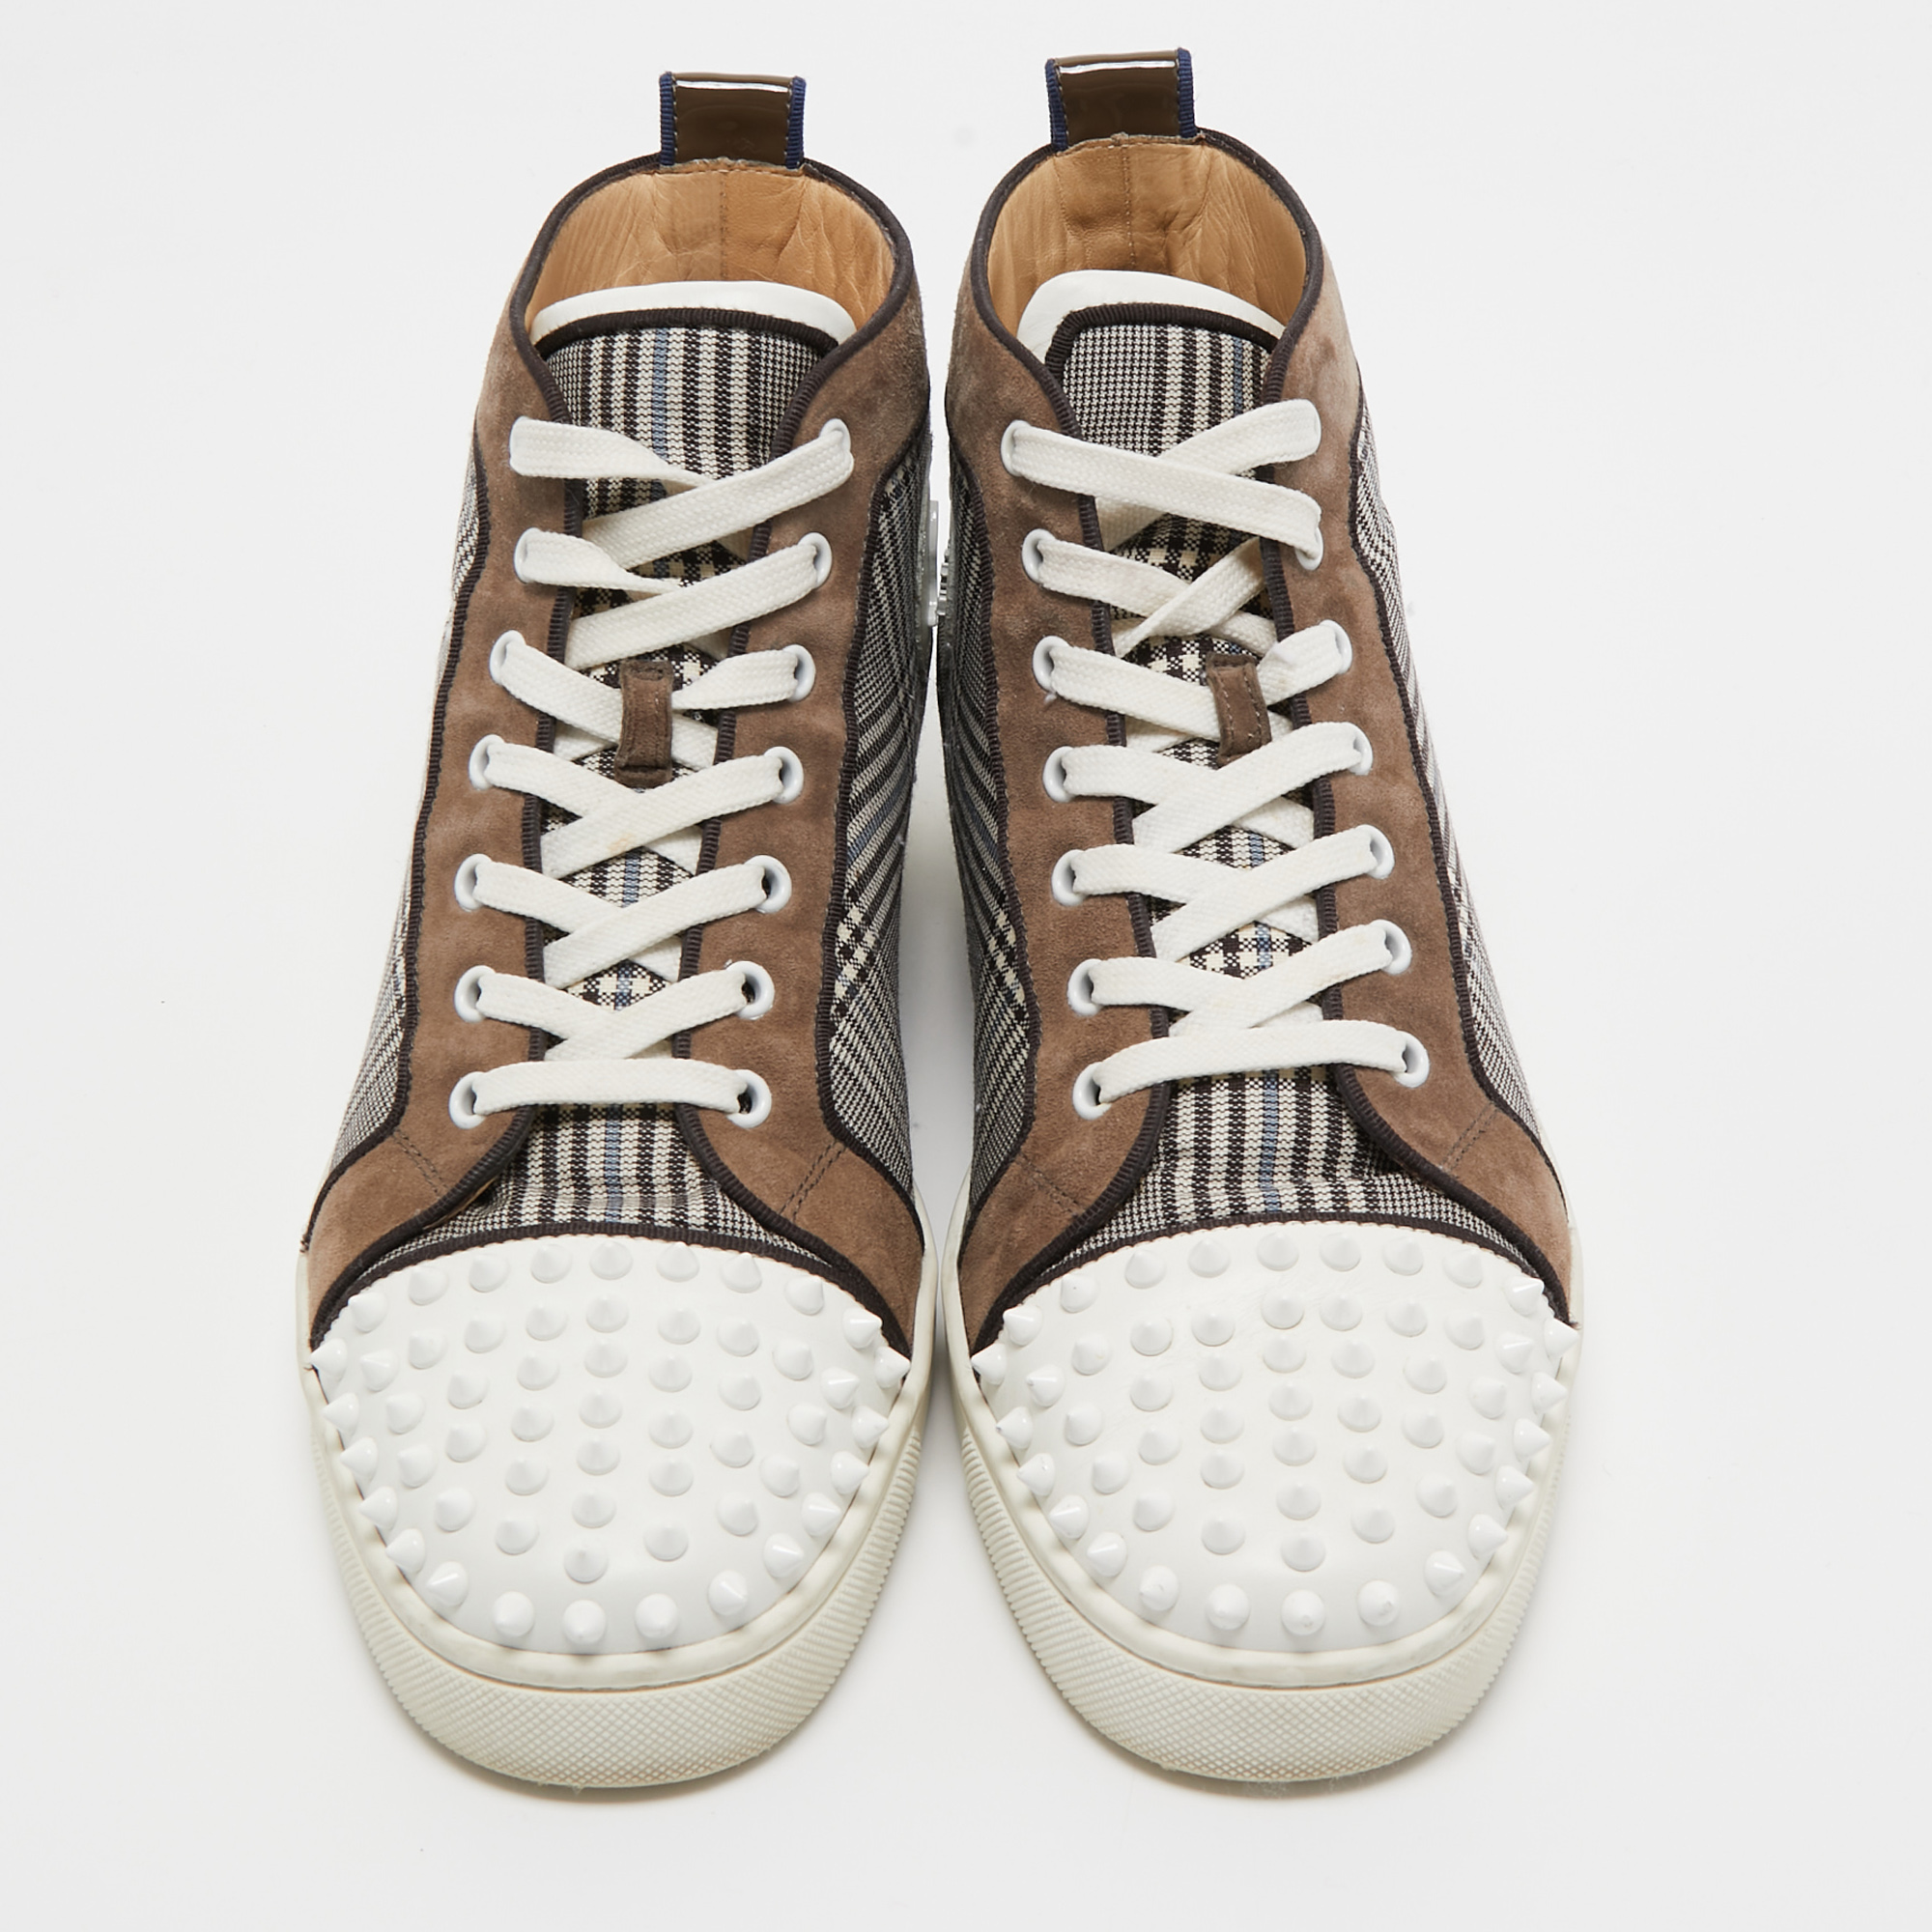 Christian Louboutin Multicolor Check Fabric And Leather Louis Spike High Top Sneakers Size 42.5